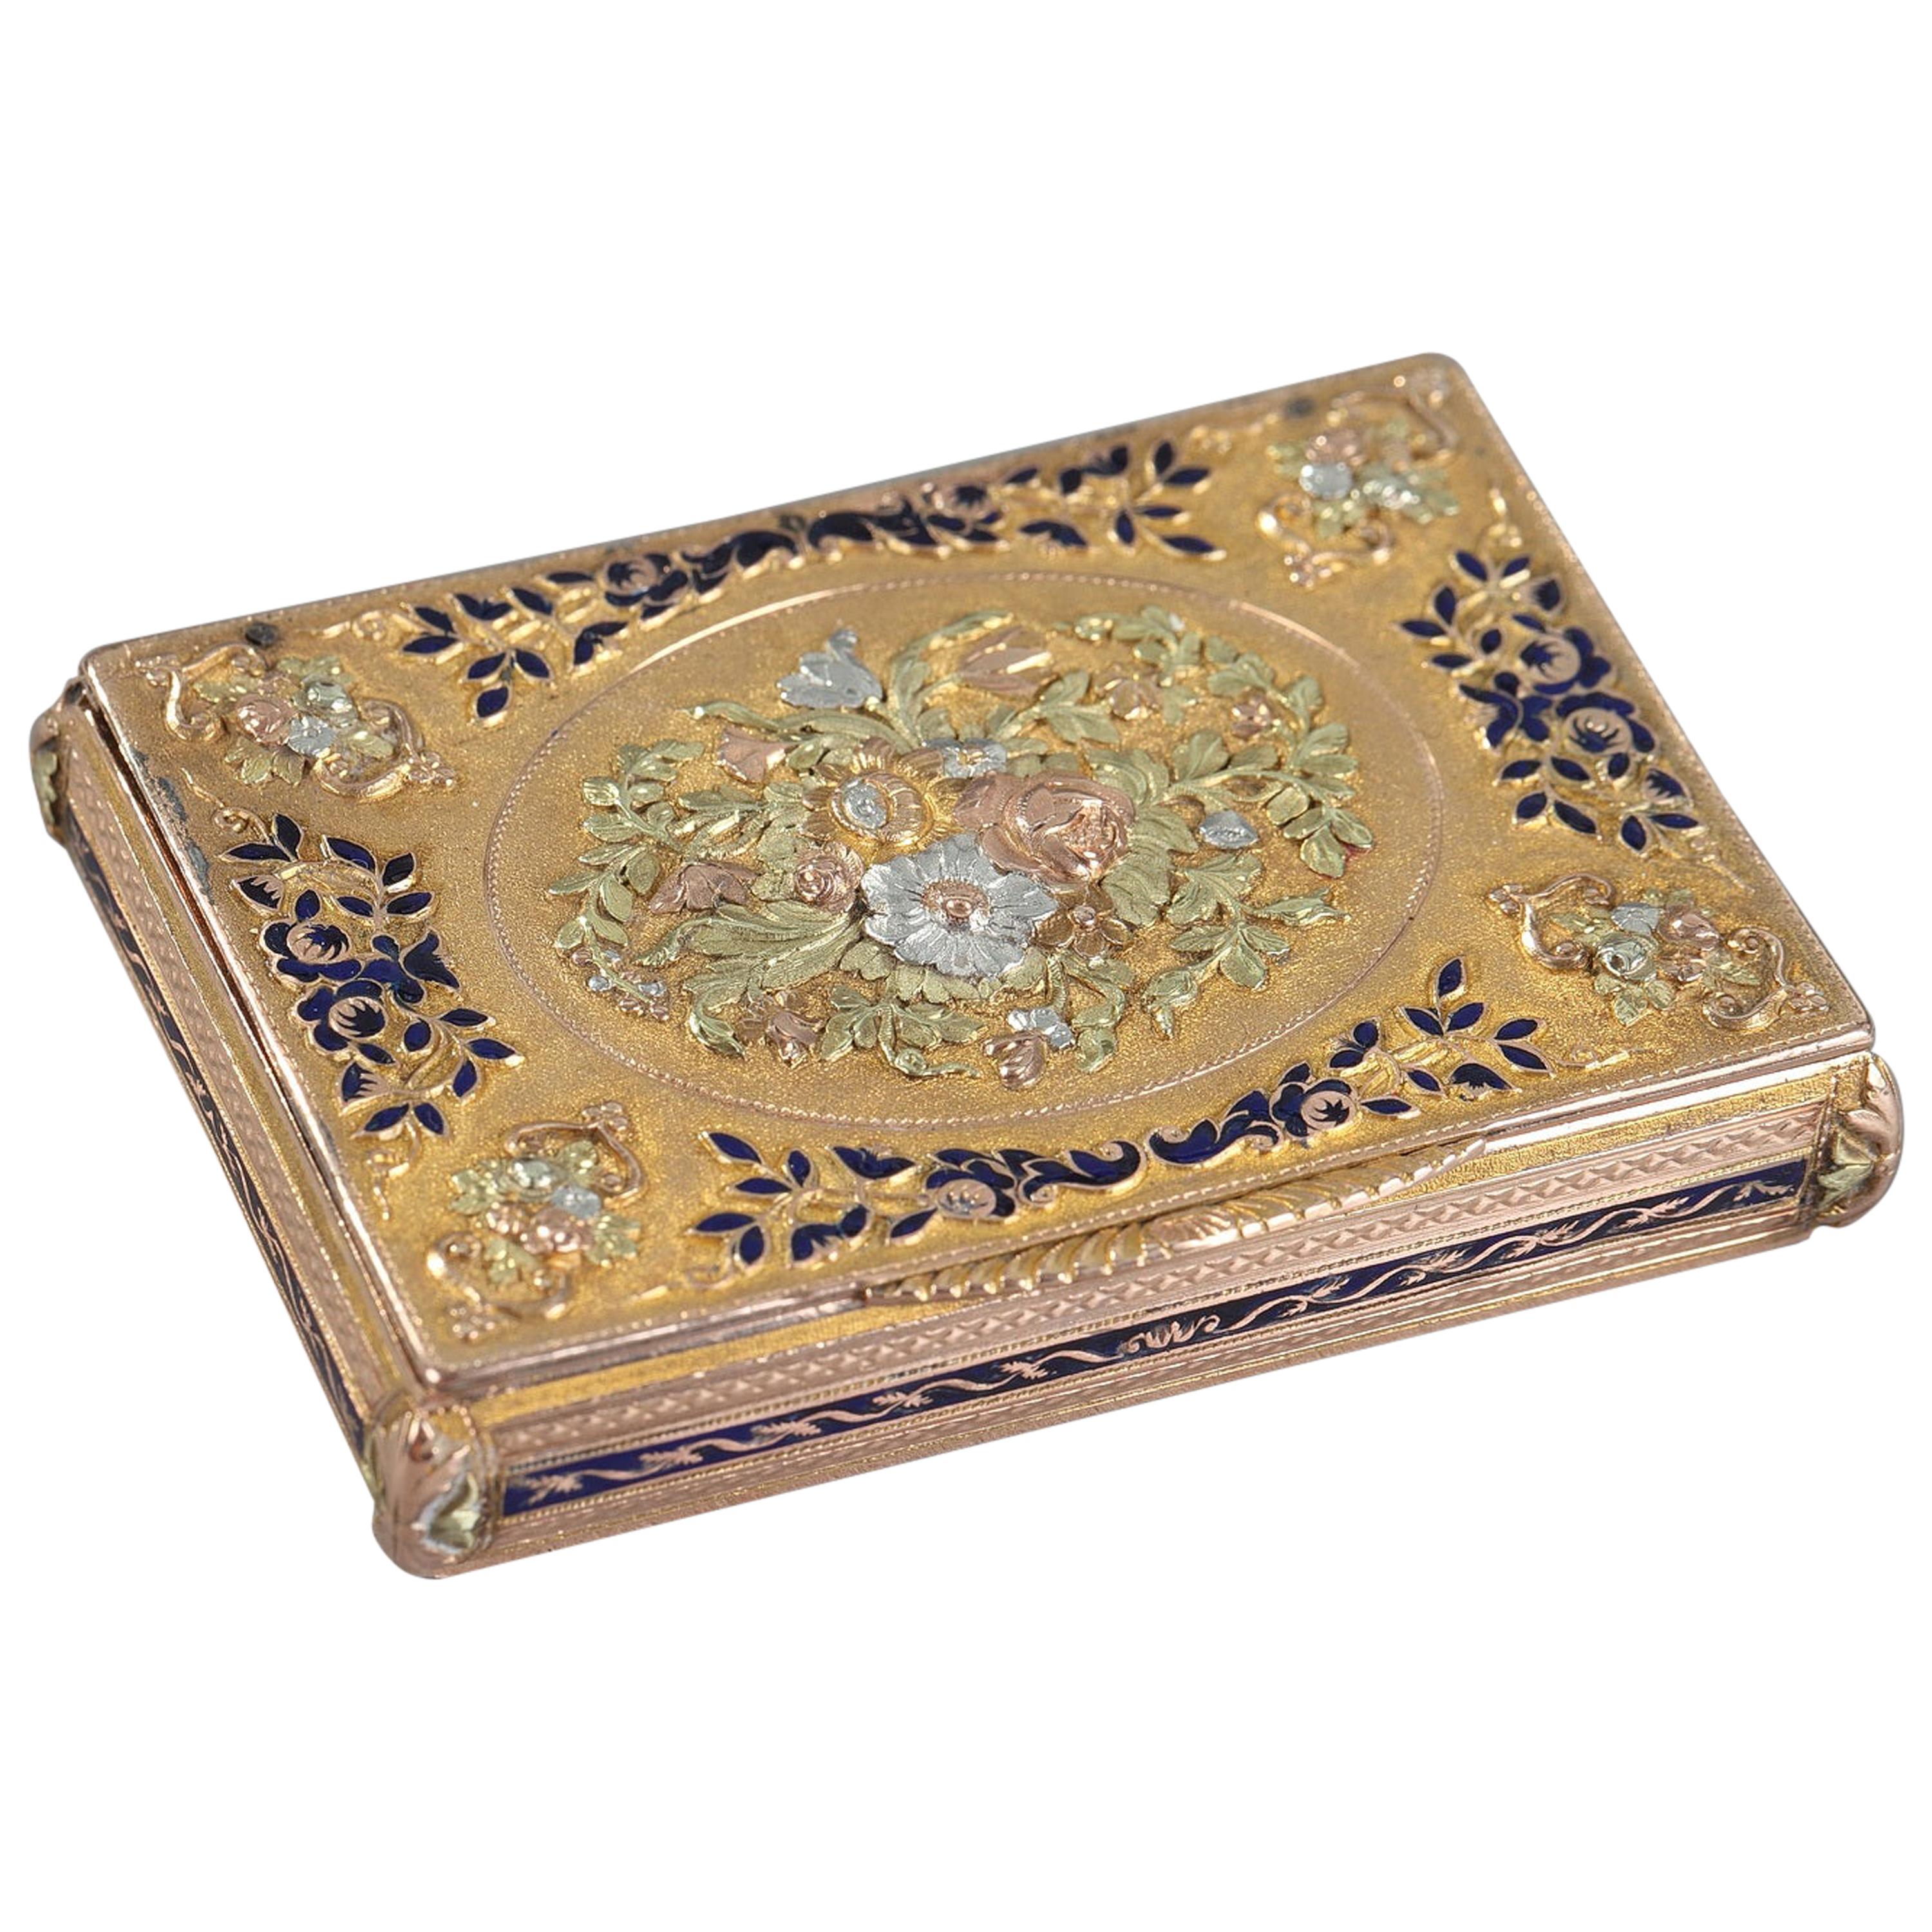 Early 19th Century Gold and Enamel Box, Swiss Work For Sale